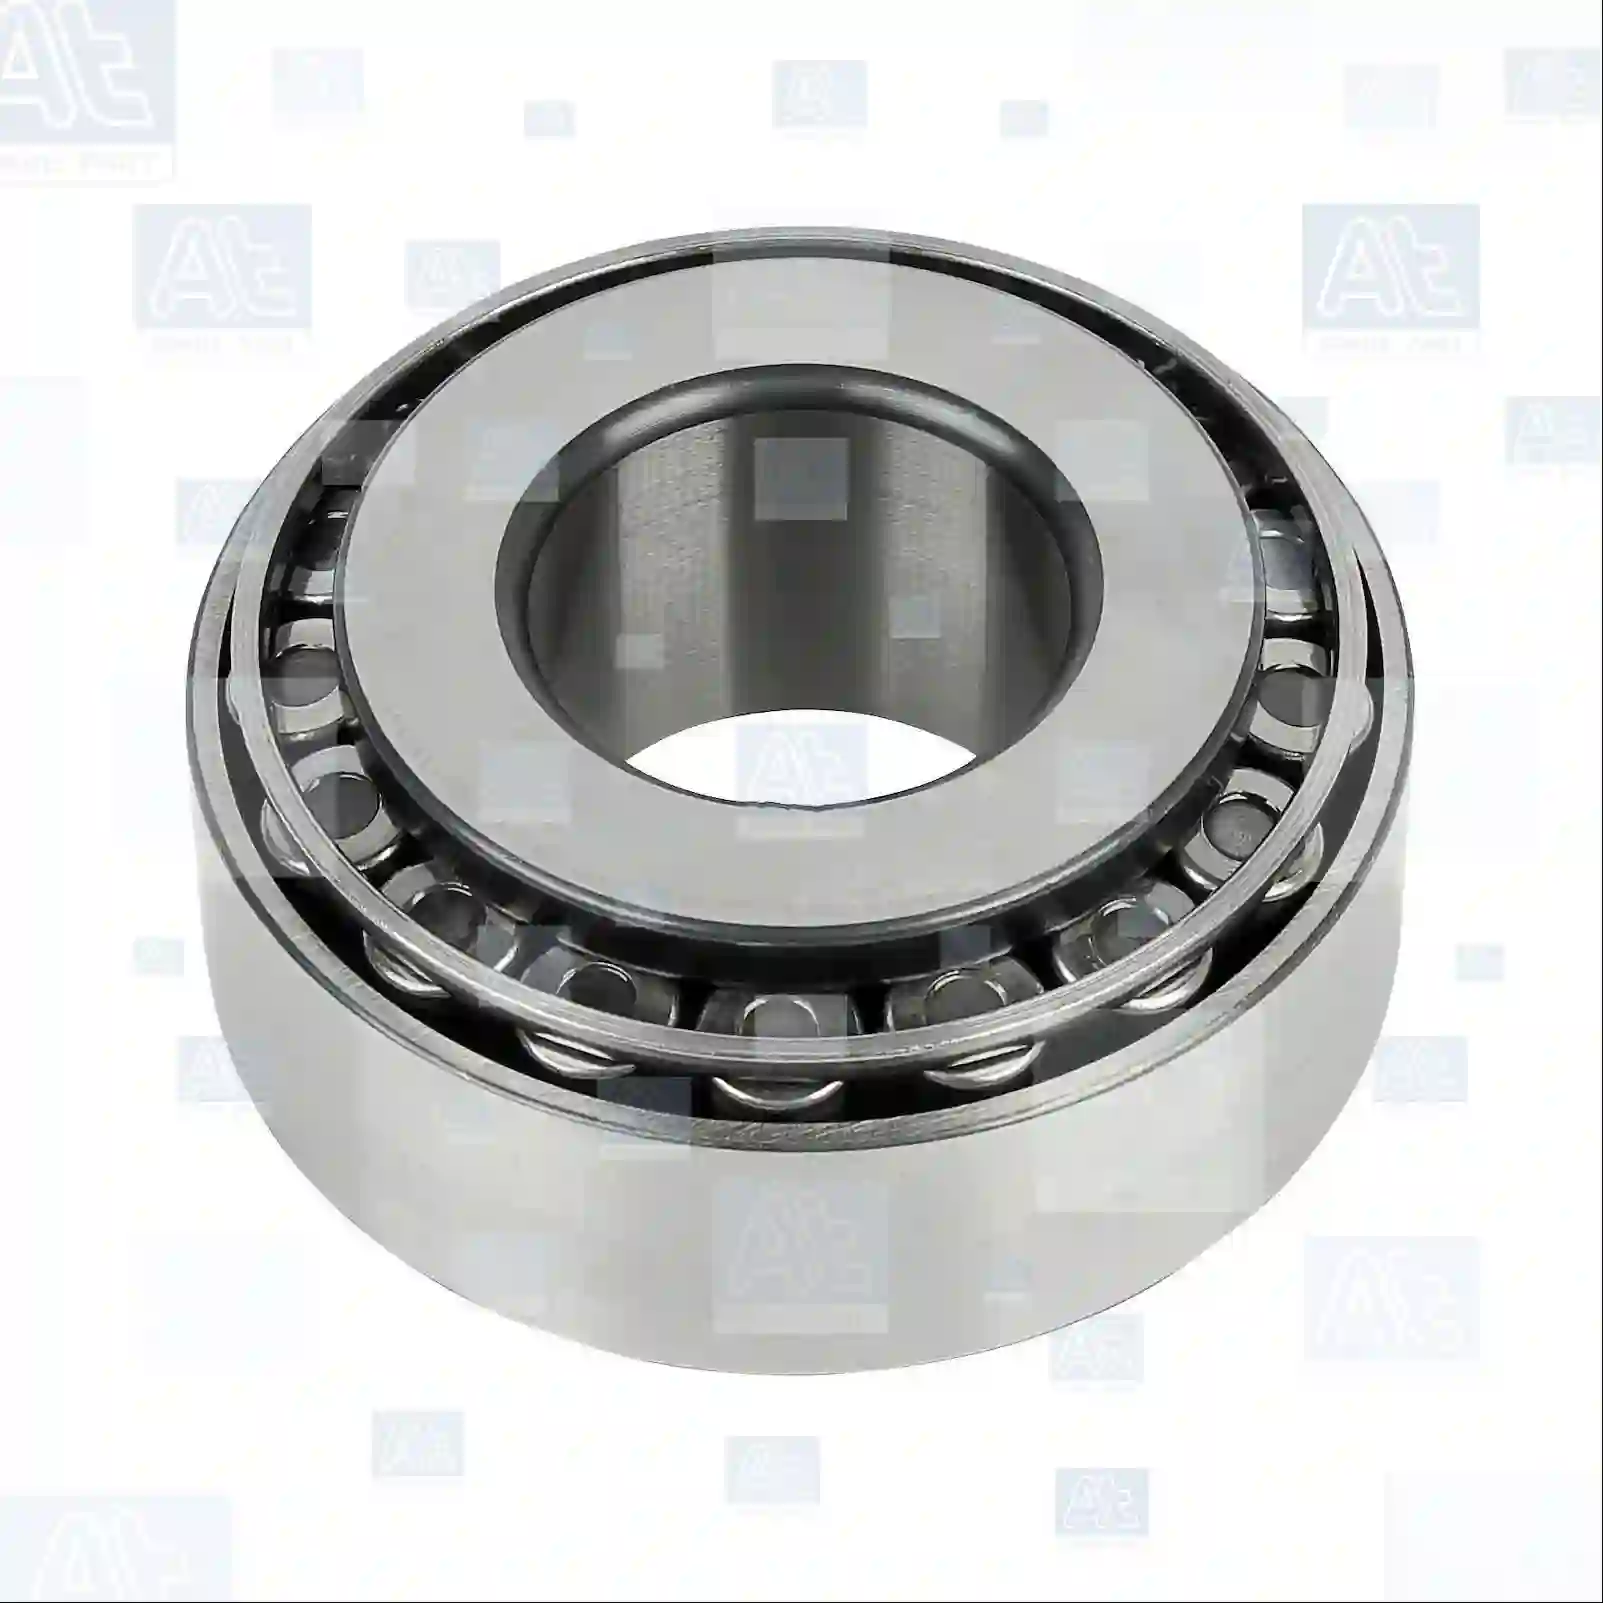 Tapered roller bearing, at no 77726116, oem no: 01110016, 94020015, 988435111, 988435111A, 988435120, 988435120A, SZ36635010, 10981-20010, 1-09812001-0, 8-94435342-0, 9-00093125-1, 9-00093621-0, 01110016, 00540-27210, 060427141, M02527210, 0009819605, 000720032307, 0019815605, 0019817005, 0039816405, 0049813405, 0049813805, 0069810705, 0069816105, 09022-0010P, 38120-61000, 0023336102, 0023432307, 0773230700, 77192, 90366-30023, 90366-35021, 90366-35023, 90366-35031, 90366-35055, 90366-35073, 97609-32307, 11063 At Spare Part | Engine, Accelerator Pedal, Camshaft, Connecting Rod, Crankcase, Crankshaft, Cylinder Head, Engine Suspension Mountings, Exhaust Manifold, Exhaust Gas Recirculation, Filter Kits, Flywheel Housing, General Overhaul Kits, Engine, Intake Manifold, Oil Cleaner, Oil Cooler, Oil Filter, Oil Pump, Oil Sump, Piston & Liner, Sensor & Switch, Timing Case, Turbocharger, Cooling System, Belt Tensioner, Coolant Filter, Coolant Pipe, Corrosion Prevention Agent, Drive, Expansion Tank, Fan, Intercooler, Monitors & Gauges, Radiator, Thermostat, V-Belt / Timing belt, Water Pump, Fuel System, Electronical Injector Unit, Feed Pump, Fuel Filter, cpl., Fuel Gauge Sender,  Fuel Line, Fuel Pump, Fuel Tank, Injection Line Kit, Injection Pump, Exhaust System, Clutch & Pedal, Gearbox, Propeller Shaft, Axles, Brake System, Hubs & Wheels, Suspension, Leaf Spring, Universal Parts / Accessories, Steering, Electrical System, Cabin Tapered roller bearing, at no 77726116, oem no: 01110016, 94020015, 988435111, 988435111A, 988435120, 988435120A, SZ36635010, 10981-20010, 1-09812001-0, 8-94435342-0, 9-00093125-1, 9-00093621-0, 01110016, 00540-27210, 060427141, M02527210, 0009819605, 000720032307, 0019815605, 0019817005, 0039816405, 0049813405, 0049813805, 0069810705, 0069816105, 09022-0010P, 38120-61000, 0023336102, 0023432307, 0773230700, 77192, 90366-30023, 90366-35021, 90366-35023, 90366-35031, 90366-35055, 90366-35073, 97609-32307, 11063 At Spare Part | Engine, Accelerator Pedal, Camshaft, Connecting Rod, Crankcase, Crankshaft, Cylinder Head, Engine Suspension Mountings, Exhaust Manifold, Exhaust Gas Recirculation, Filter Kits, Flywheel Housing, General Overhaul Kits, Engine, Intake Manifold, Oil Cleaner, Oil Cooler, Oil Filter, Oil Pump, Oil Sump, Piston & Liner, Sensor & Switch, Timing Case, Turbocharger, Cooling System, Belt Tensioner, Coolant Filter, Coolant Pipe, Corrosion Prevention Agent, Drive, Expansion Tank, Fan, Intercooler, Monitors & Gauges, Radiator, Thermostat, V-Belt / Timing belt, Water Pump, Fuel System, Electronical Injector Unit, Feed Pump, Fuel Filter, cpl., Fuel Gauge Sender,  Fuel Line, Fuel Pump, Fuel Tank, Injection Line Kit, Injection Pump, Exhaust System, Clutch & Pedal, Gearbox, Propeller Shaft, Axles, Brake System, Hubs & Wheels, Suspension, Leaf Spring, Universal Parts / Accessories, Steering, Electrical System, Cabin